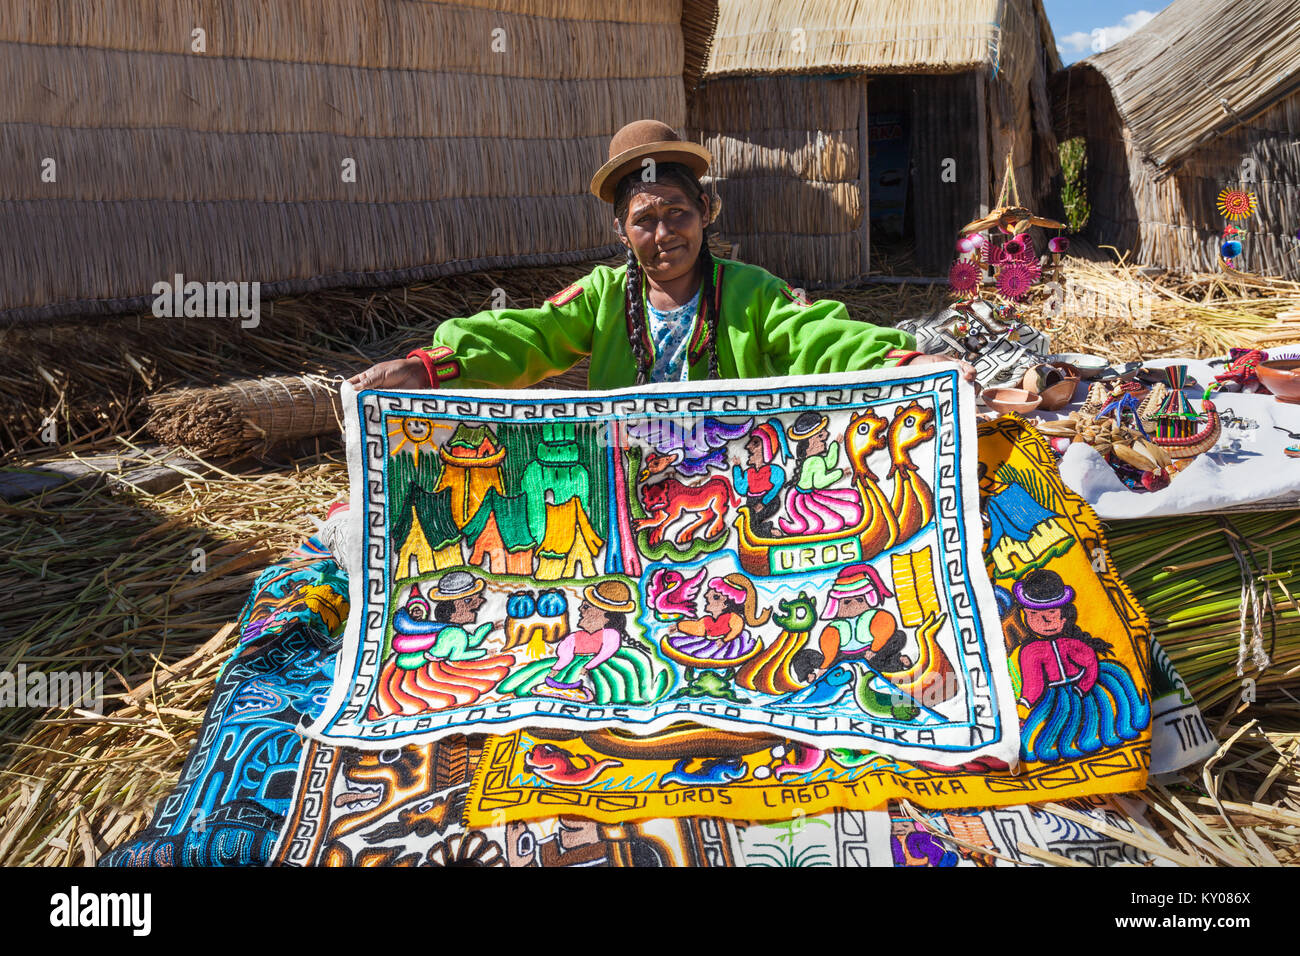 PUNO, PERU - MAY 14, 2015: Unidentified woman in traditional dress showing handicrafts in Uros Island. Stock Photo